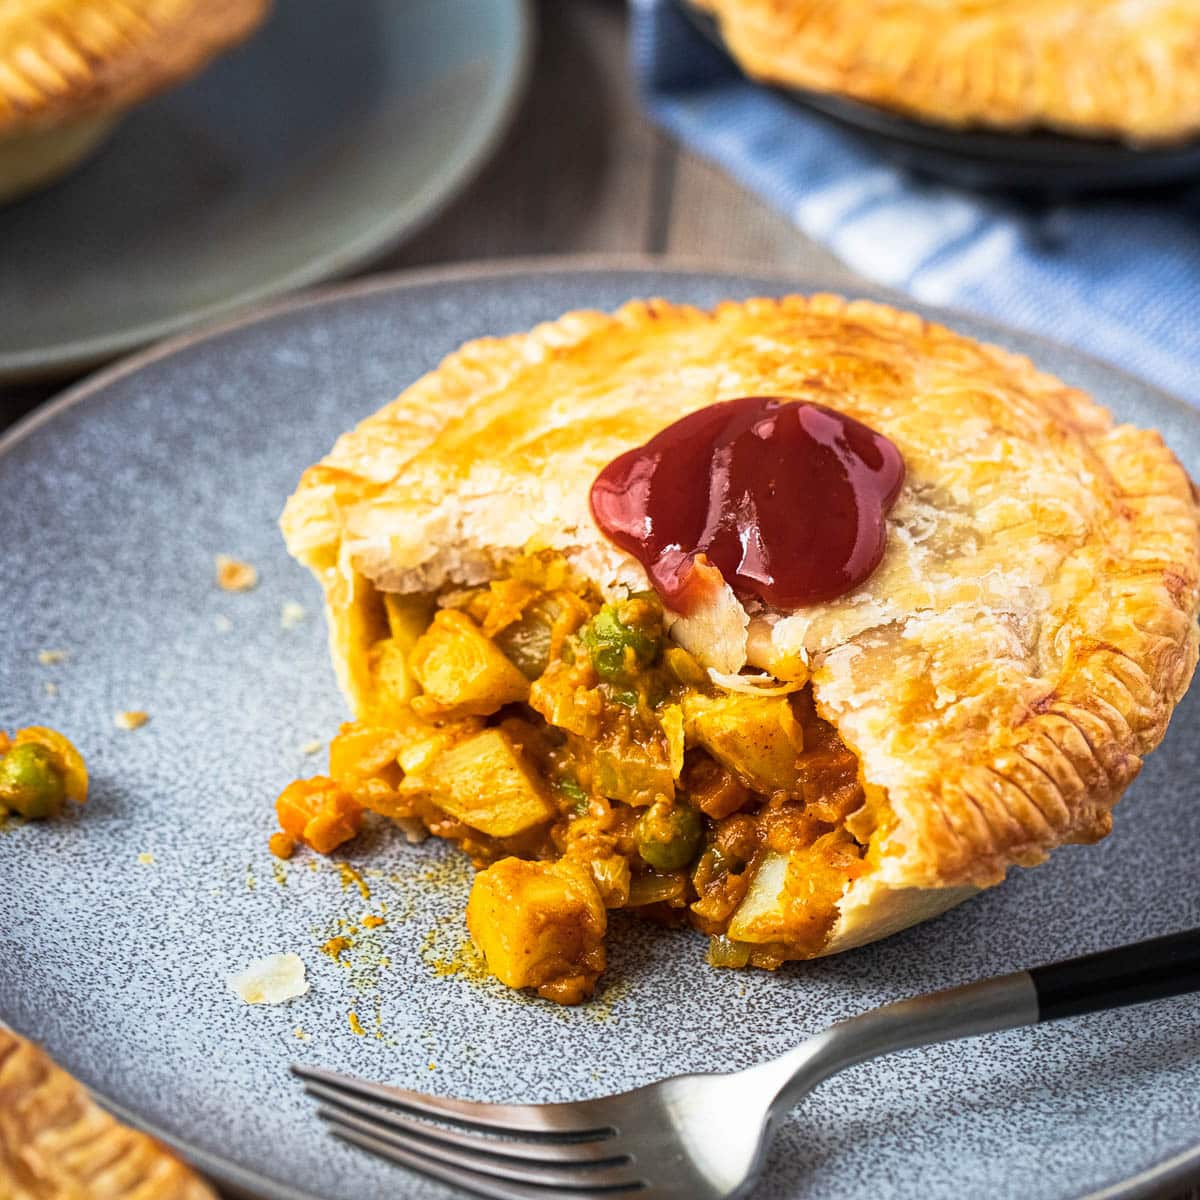 https://www.thecookingcollective.com.au/wp-content/uploads/2022/05/vegetable-curry-pies-13.jpg